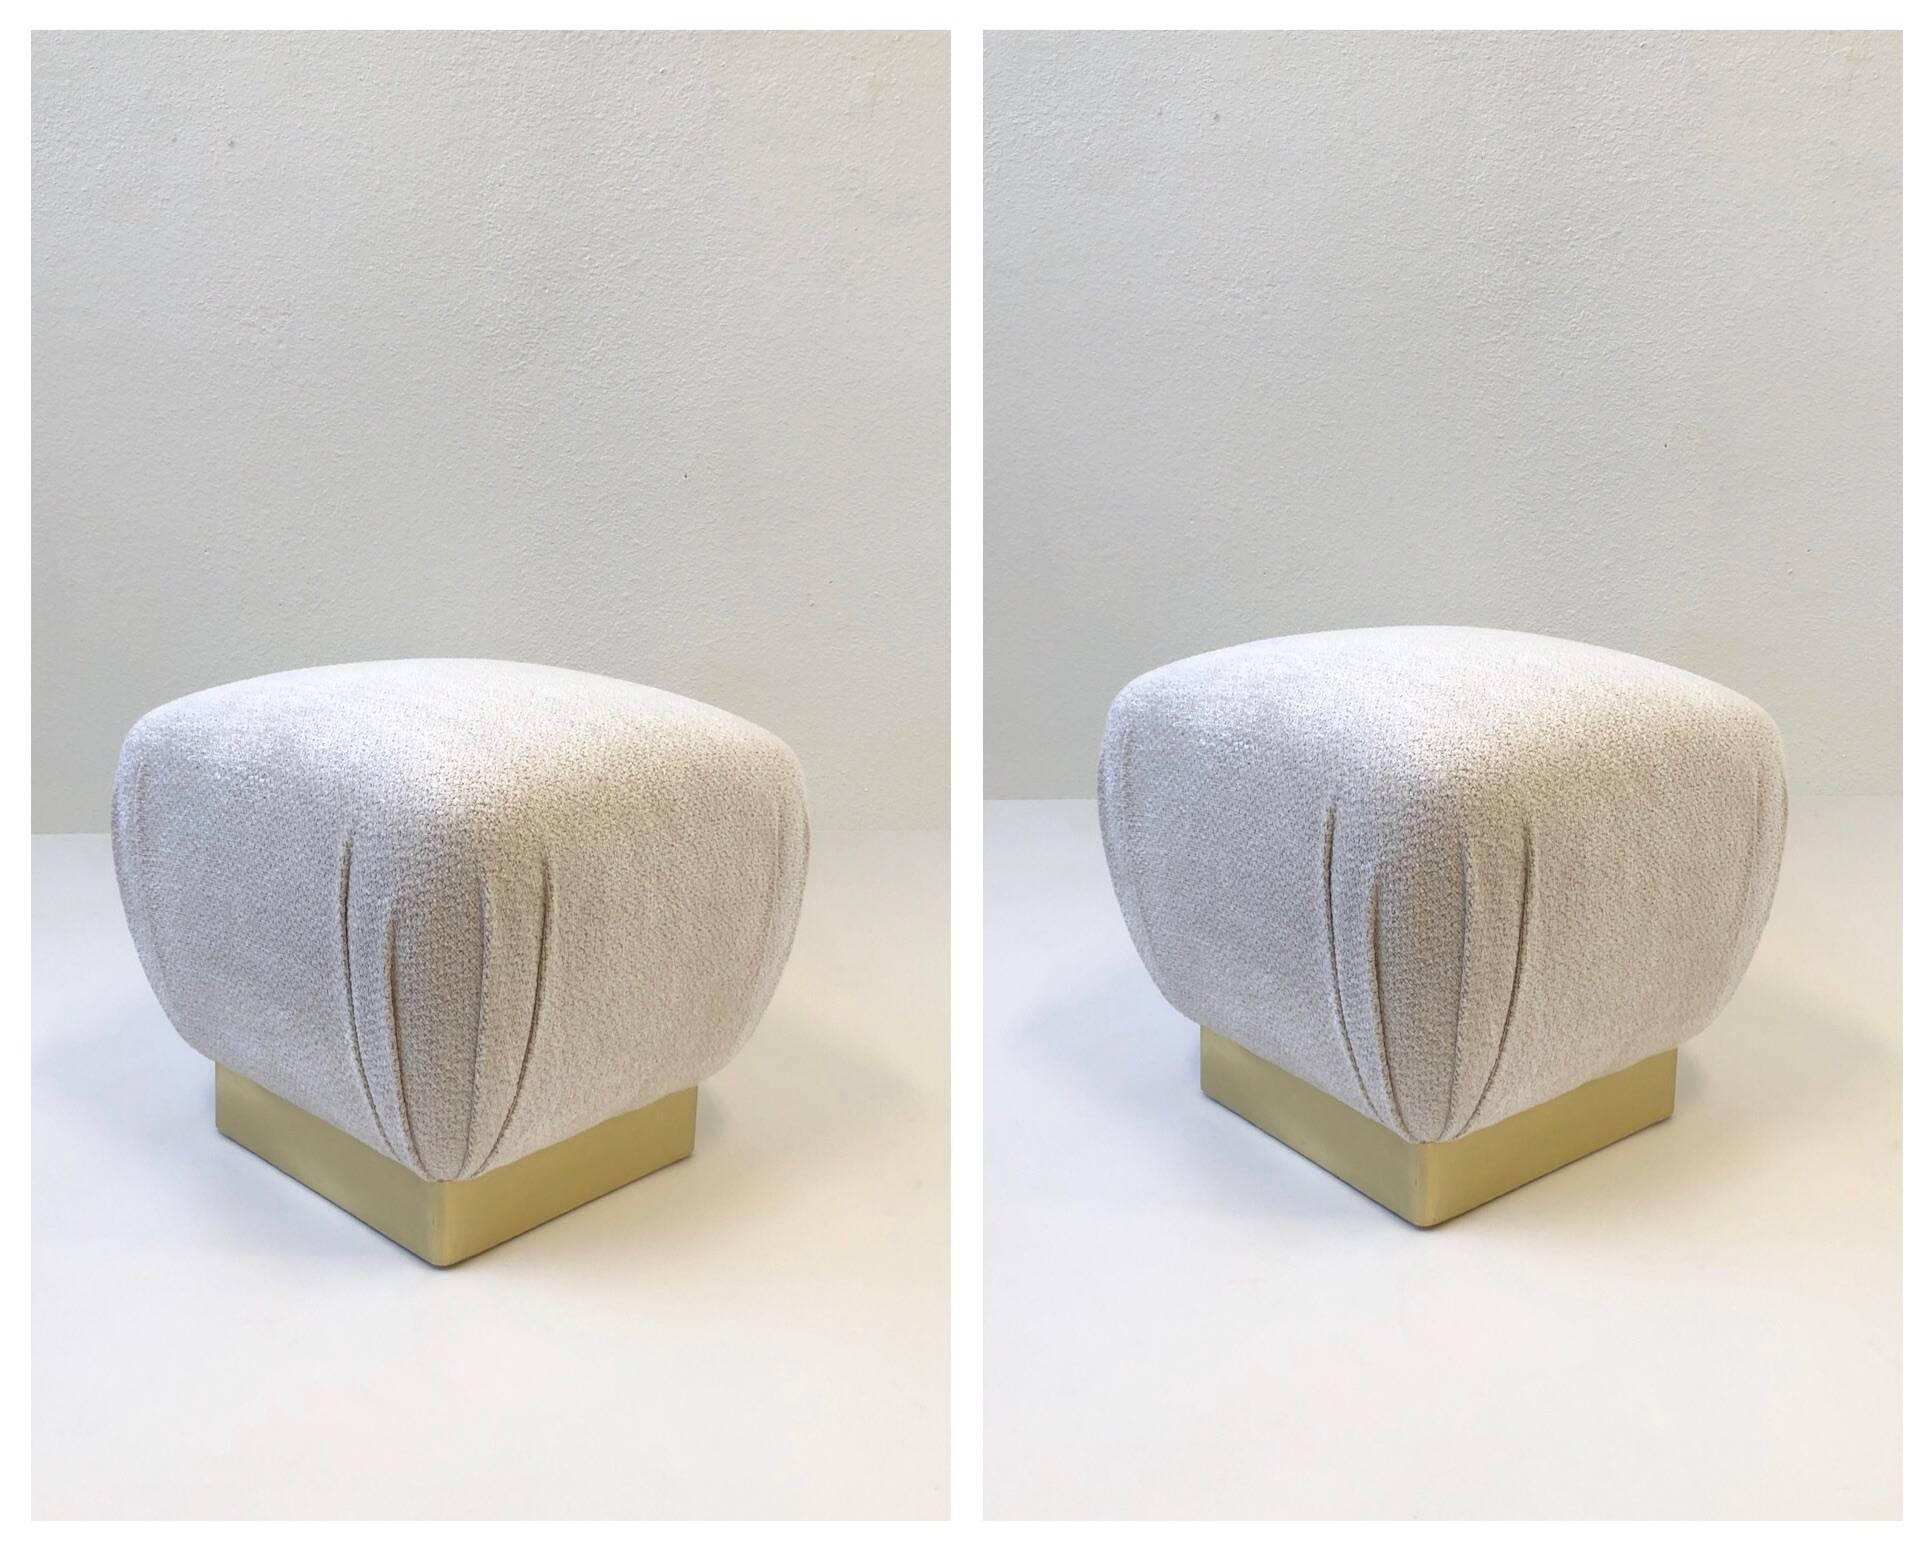 A glamorous pair of 1970s poufs by Marge Carson. The base is wood covered with a satin brass band. Newly recovered with a soft off white with light grey dreads Chanel fabric (see detail photos).

Dimension: 18” high 20” wide 20” deep.